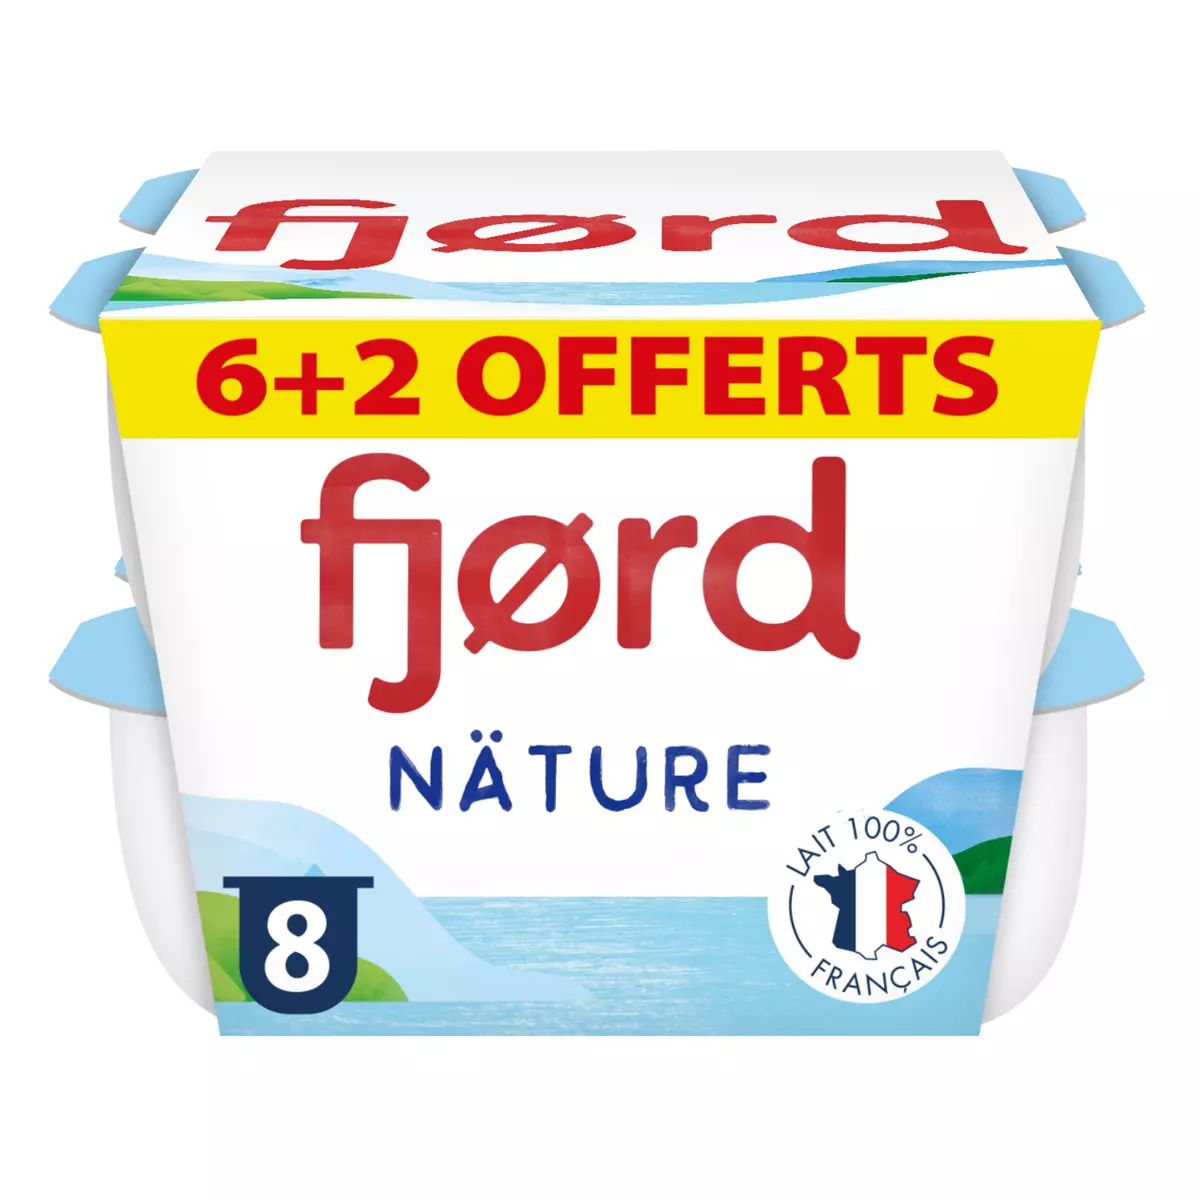 FJORD Yaourt fromage blanc crémeux nature 6+2 offerts 8x125g